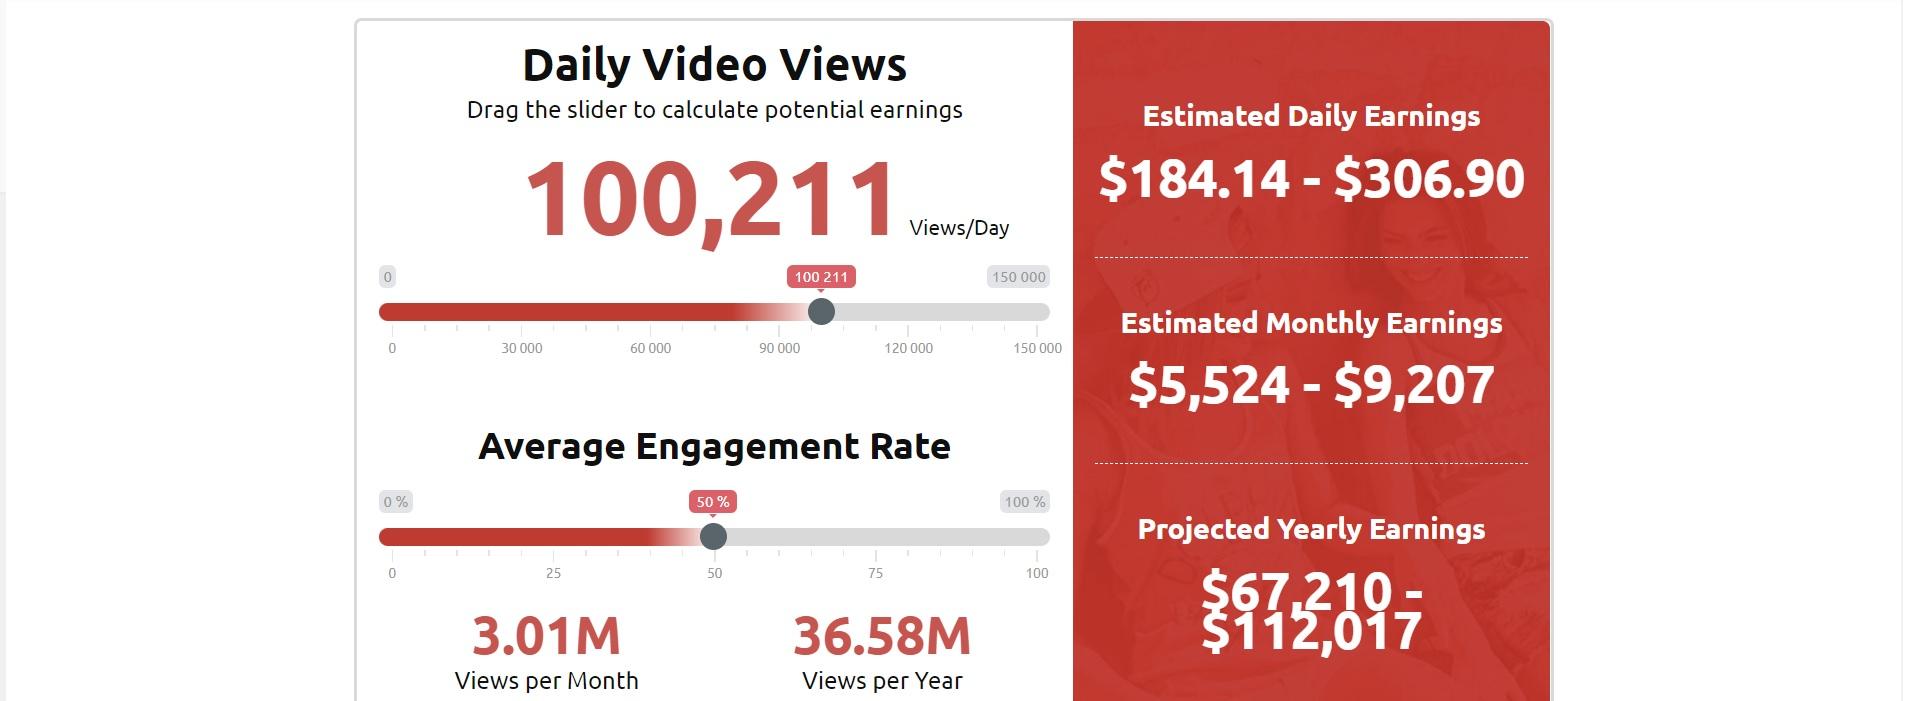 How Much Do Youtubers Make: Maximizing earnings for YouTubers through effective content and audience engagement.